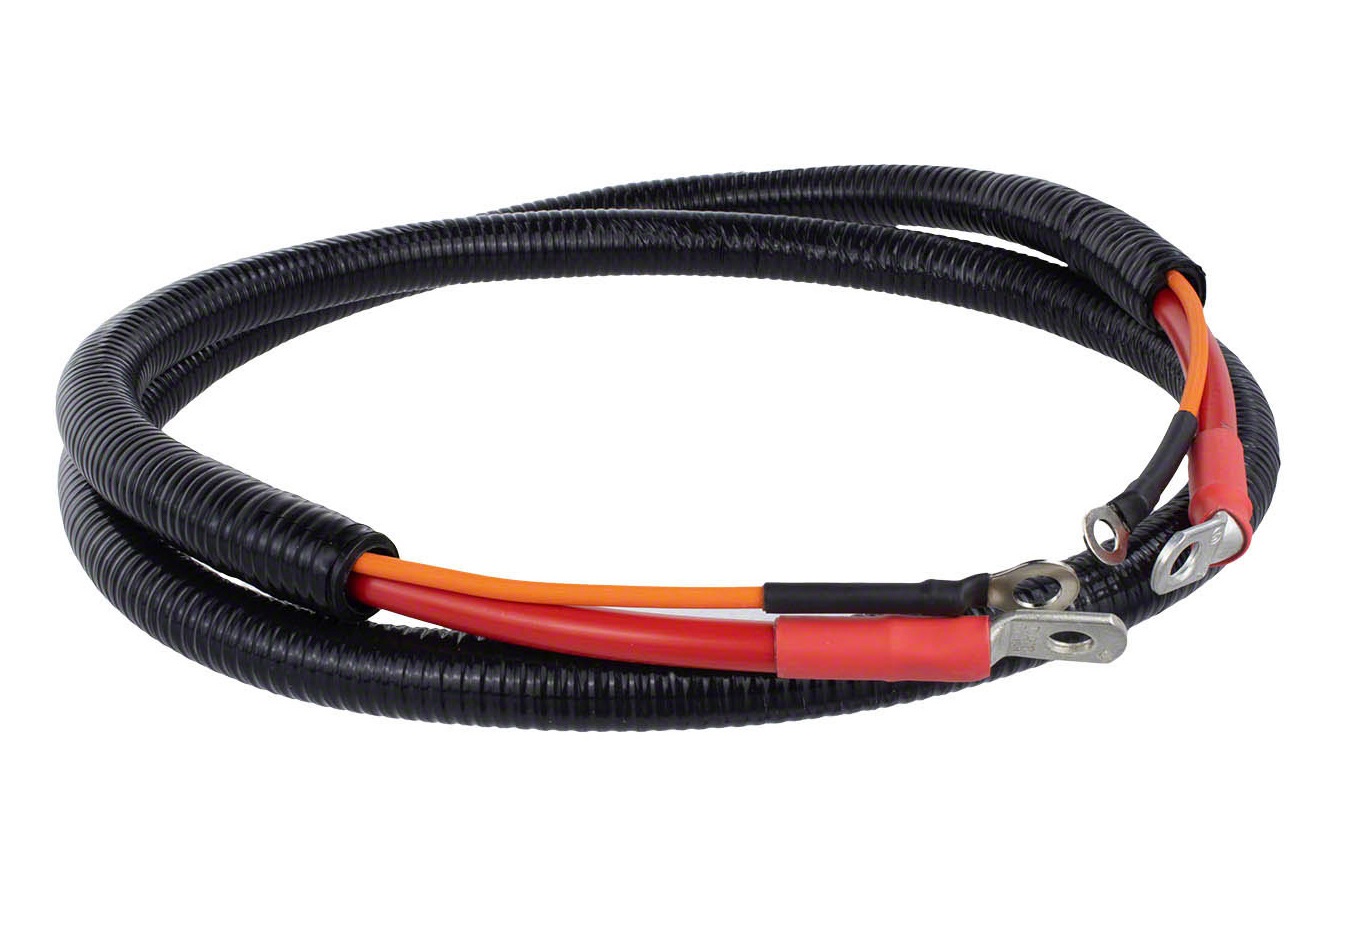 Starter Cable (Fits all Mustang Engines)